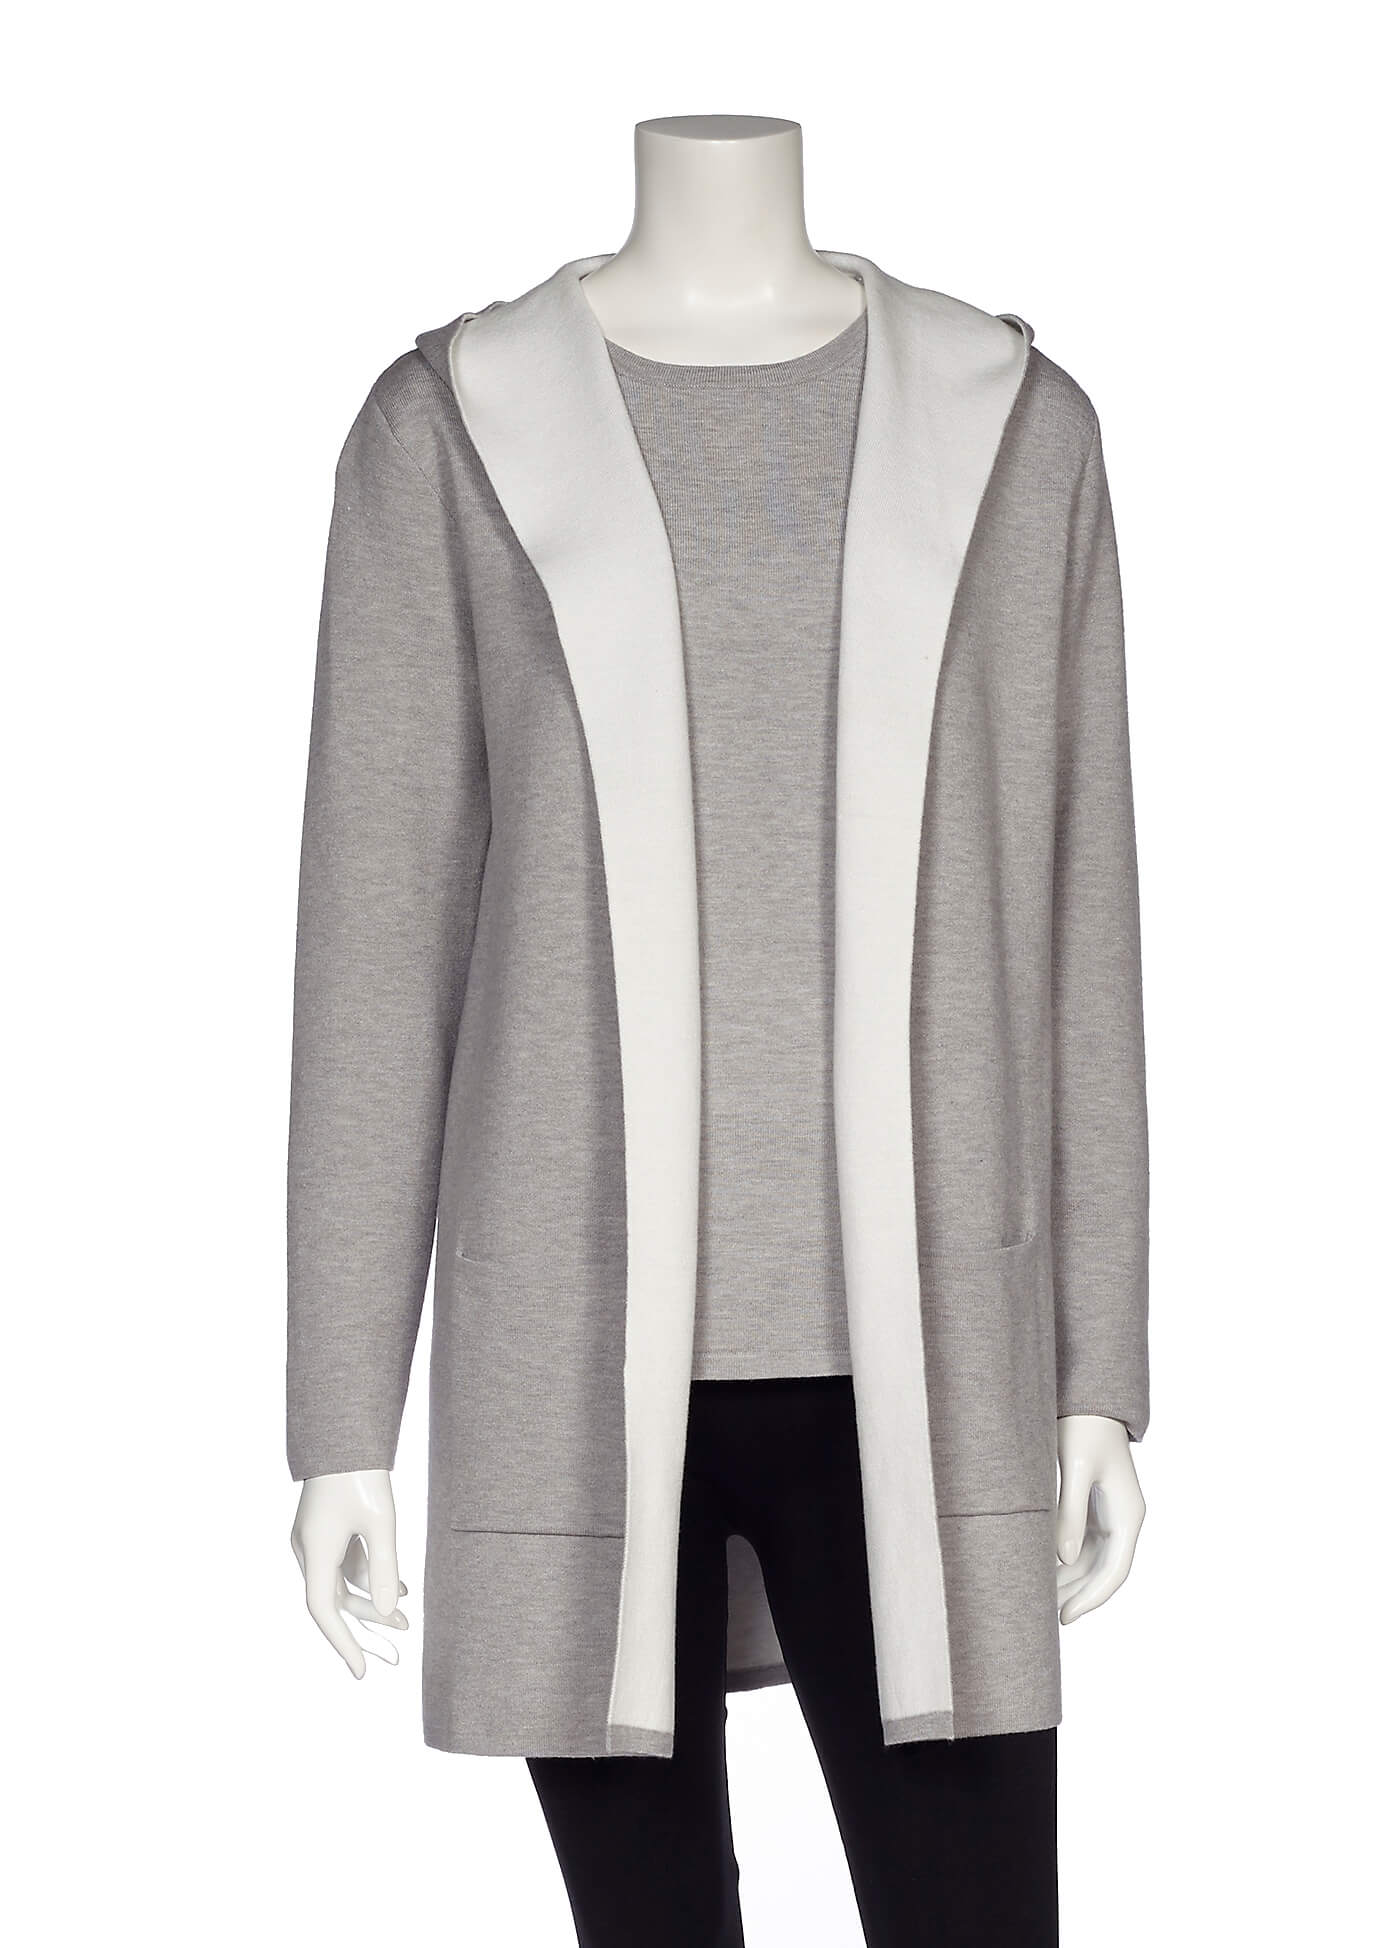 SILVER AND CREAM HOODED CARDIGAN